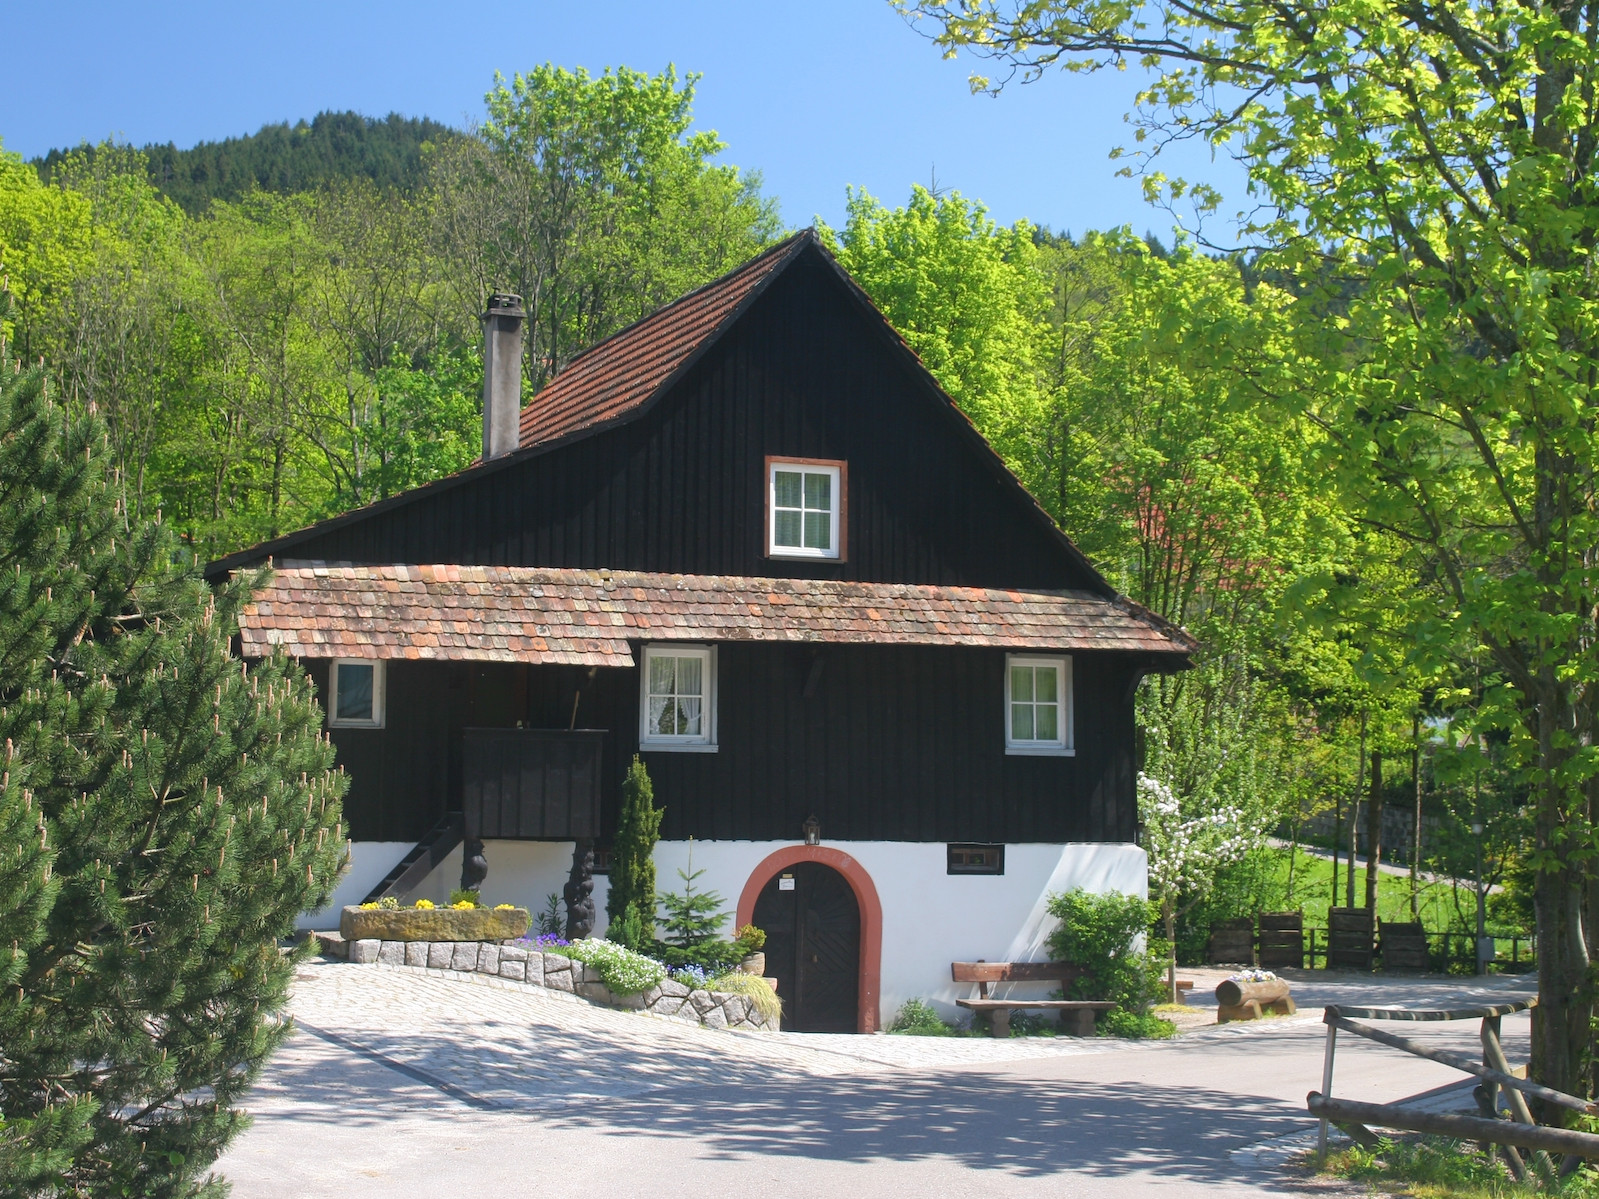  Vollmers Mühle 